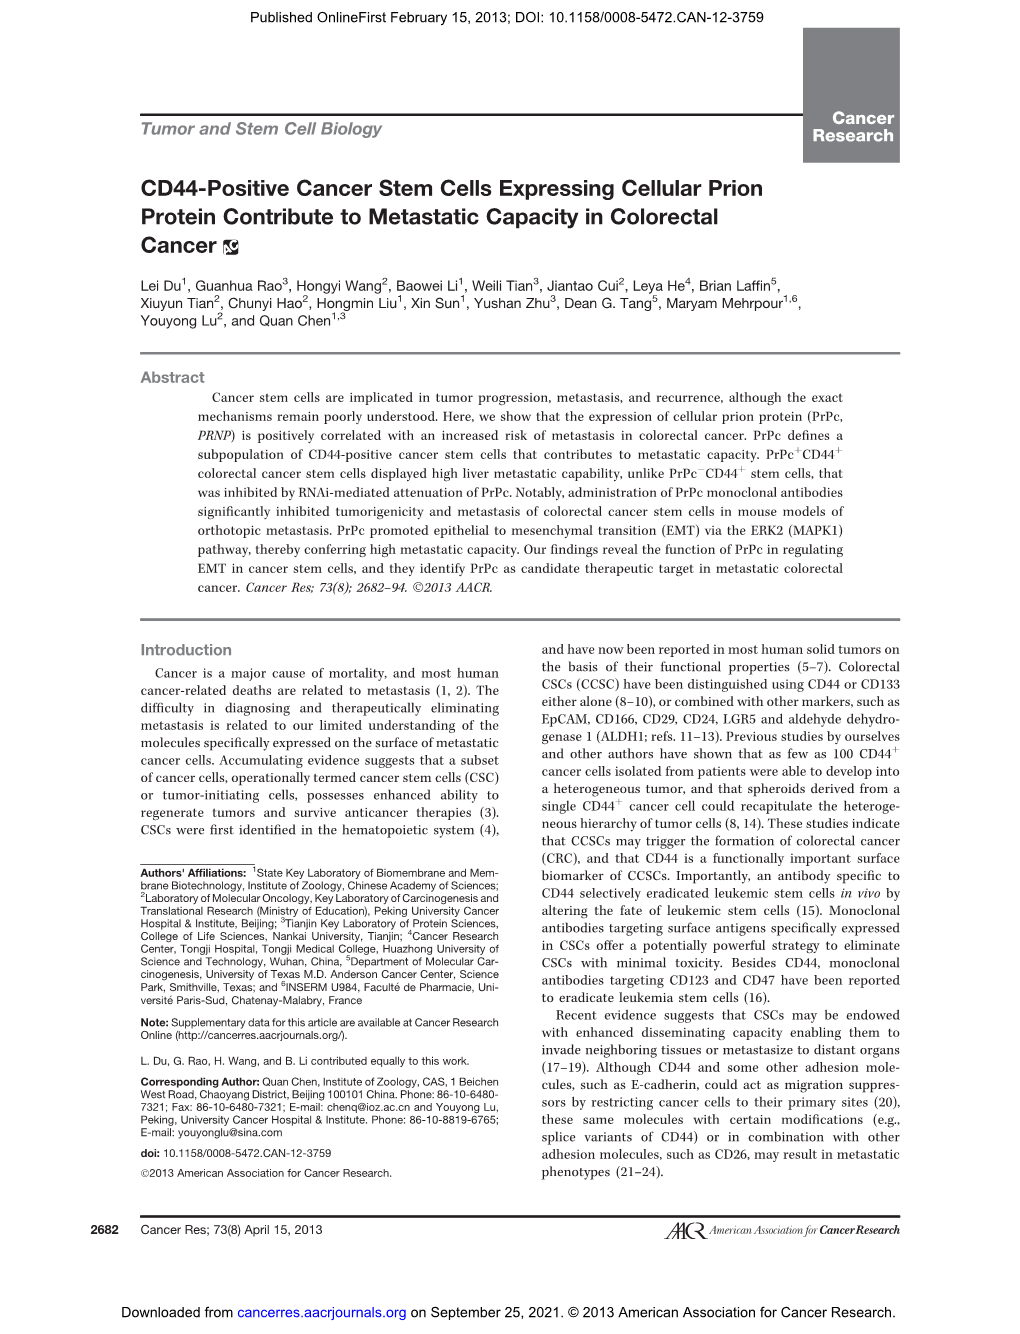 CD44-Positive Cancer Stem Cells Expressing Cellular Prion Protein Contribute to Metastatic Capacity in Colorectal Cancer